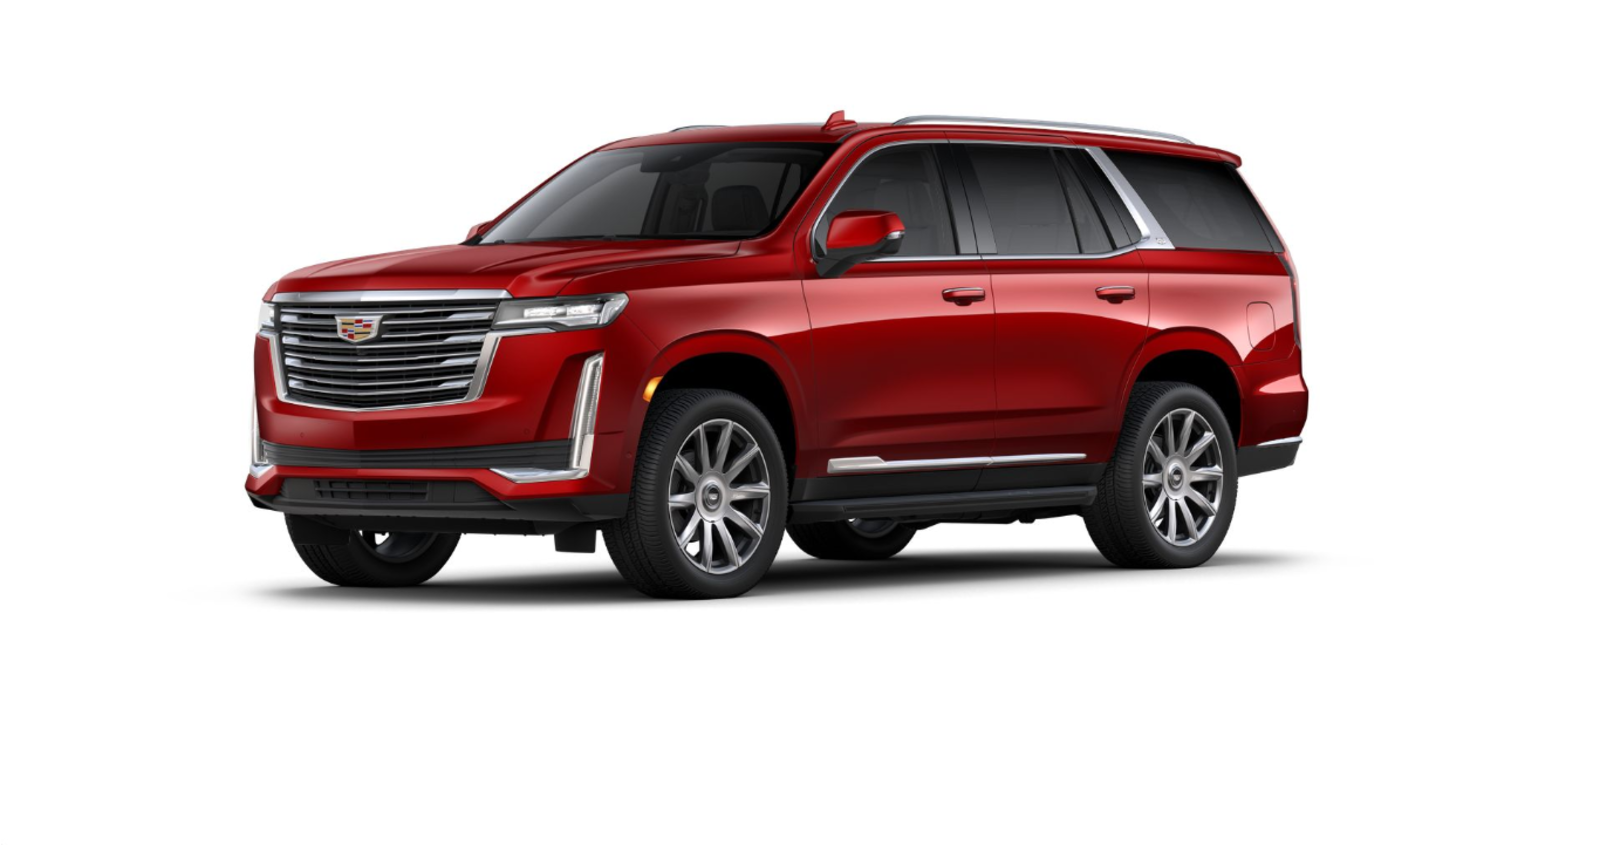 Illustration for article titled The 2021 Cadillac Escalade starts at $77,490;$80,490 for ESV